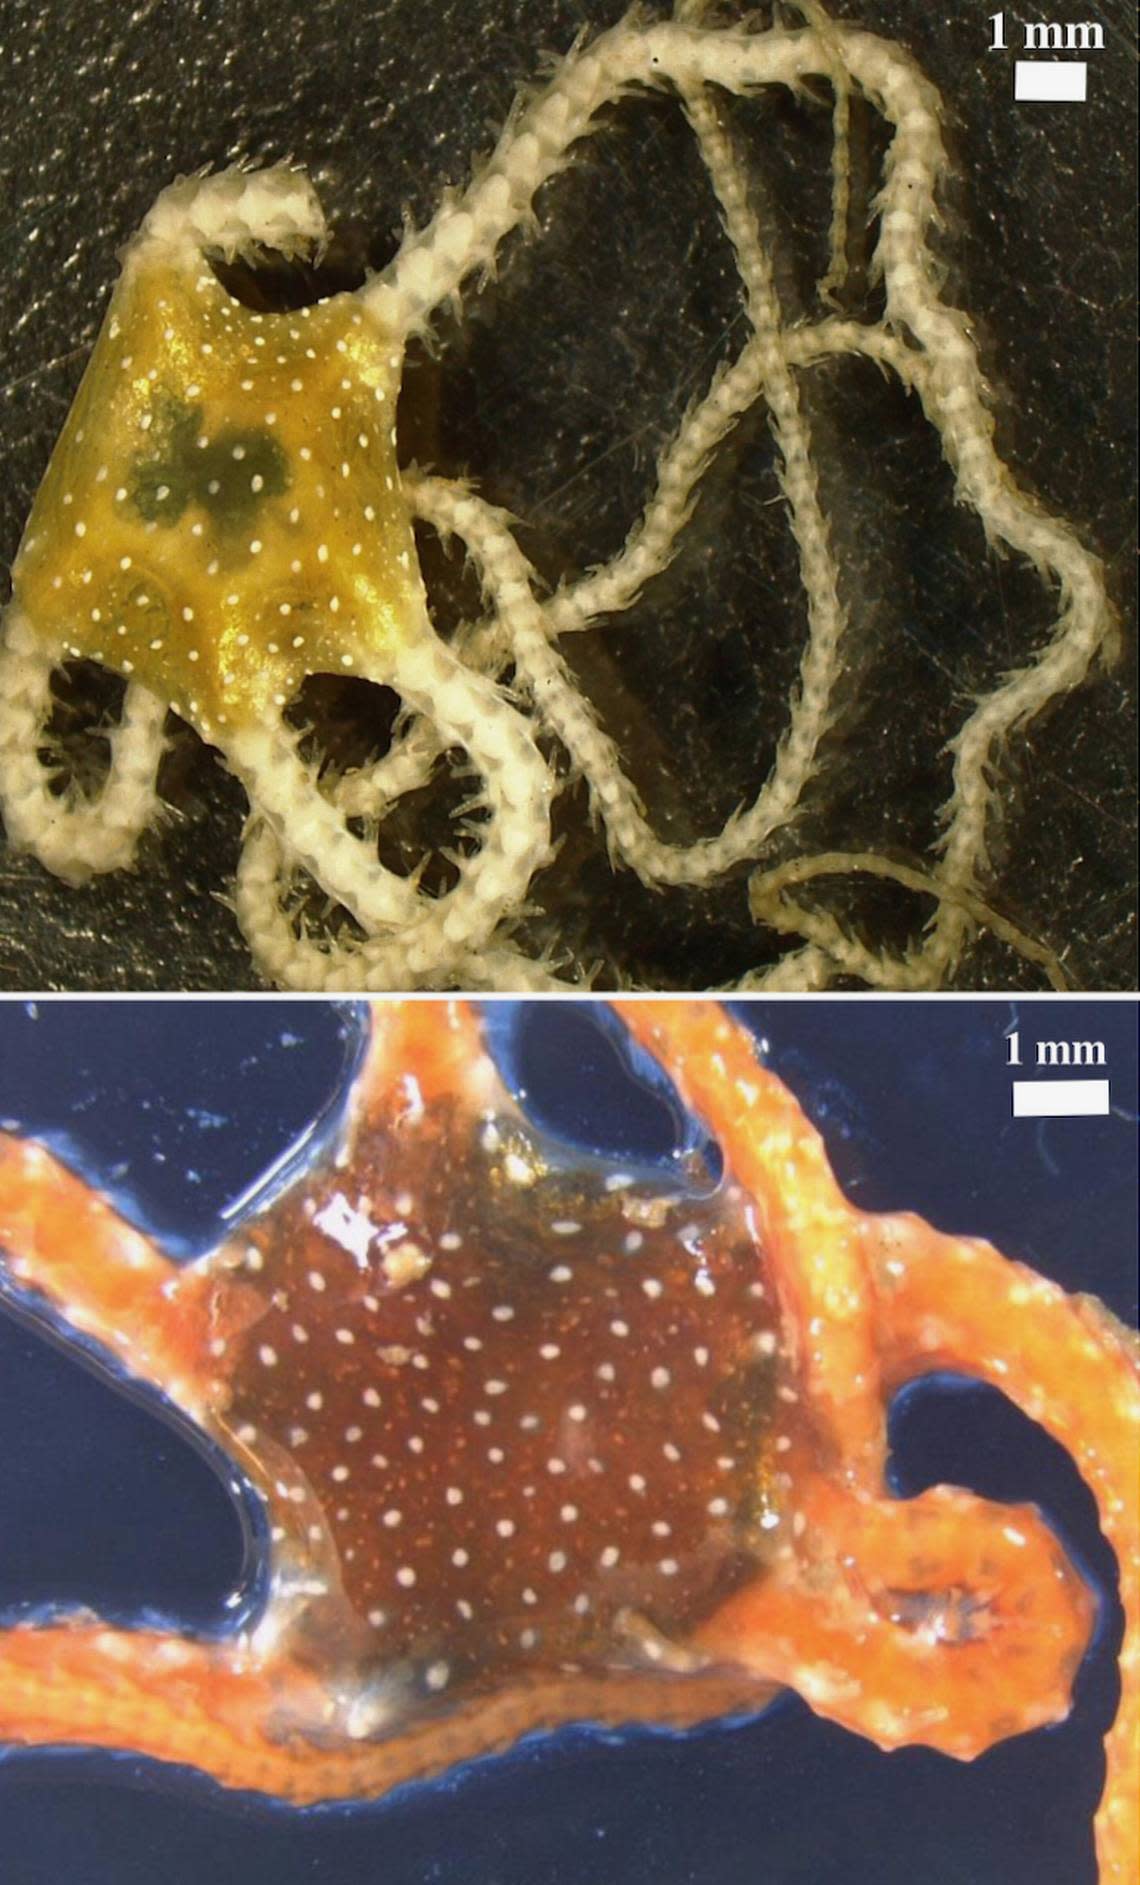 A Ophiomyxa xispa, or spark brittle star, alive (bottom) and after being preserved (top). Photos from Ordines, Ramírez-Amaro, Calero, Farriols and Massutí (2024), shared by Sergio Ramírez-Amaro